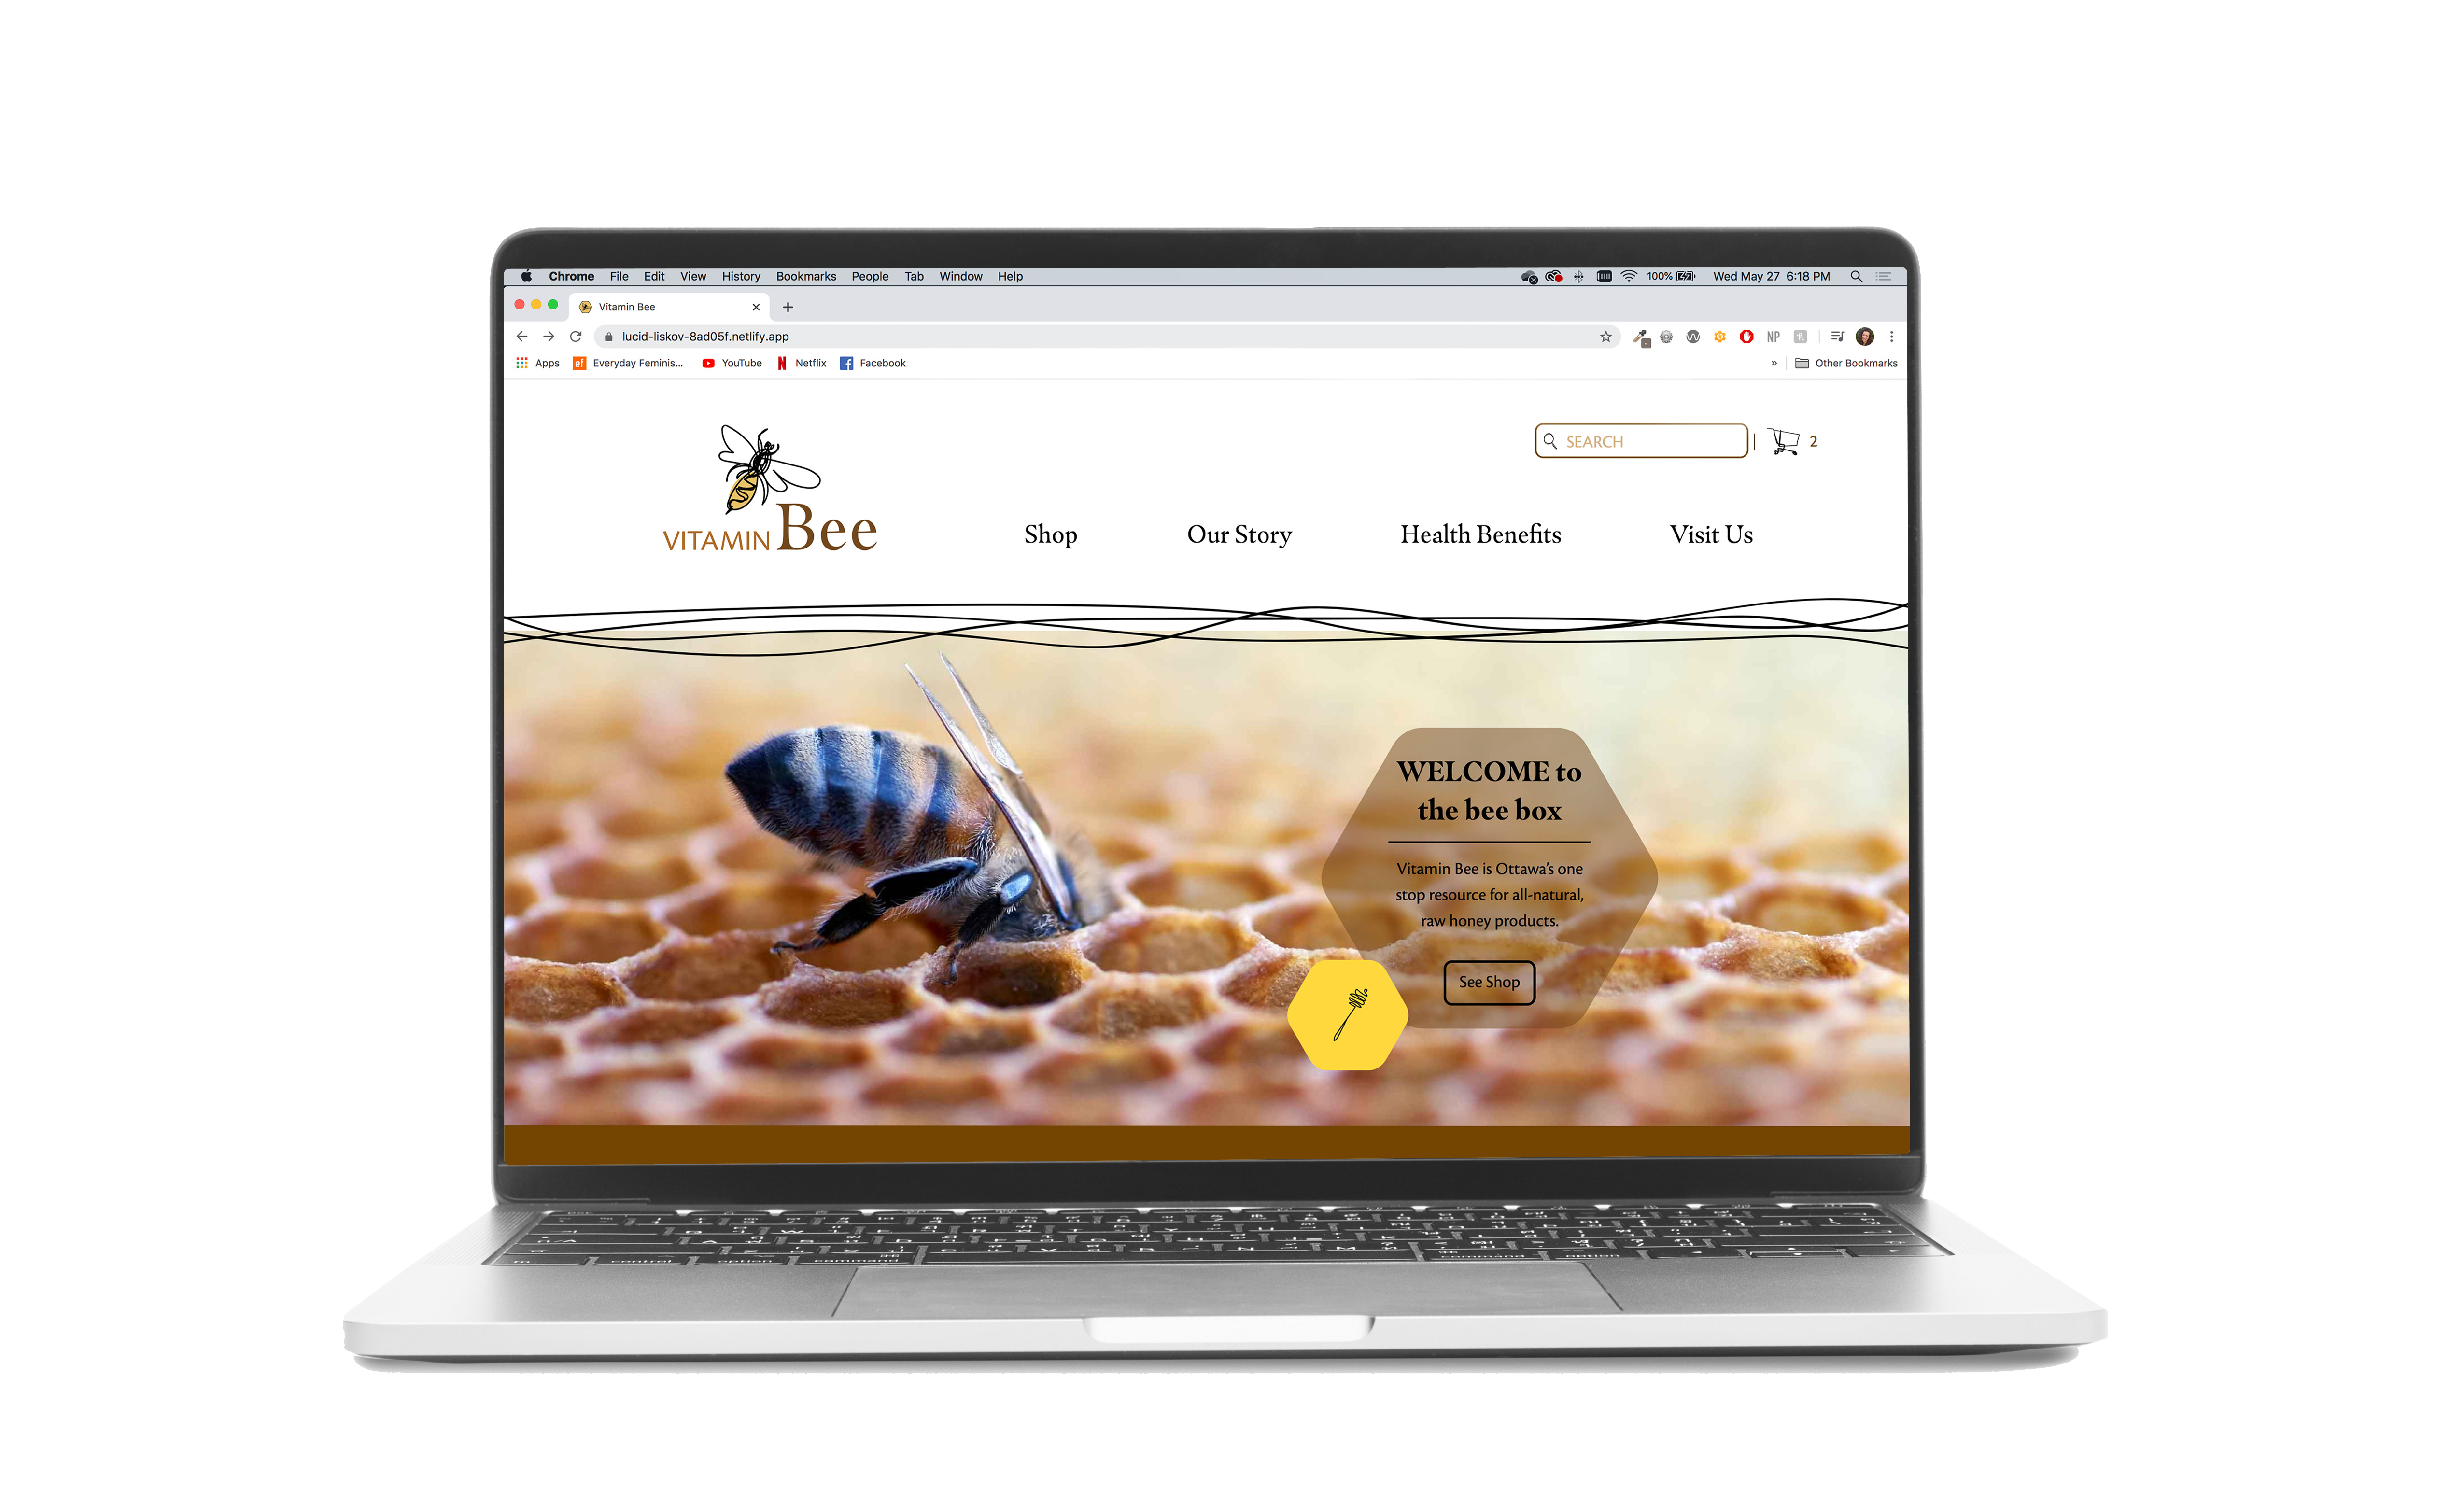 A laptop showing the Vitamin Bee homepage.